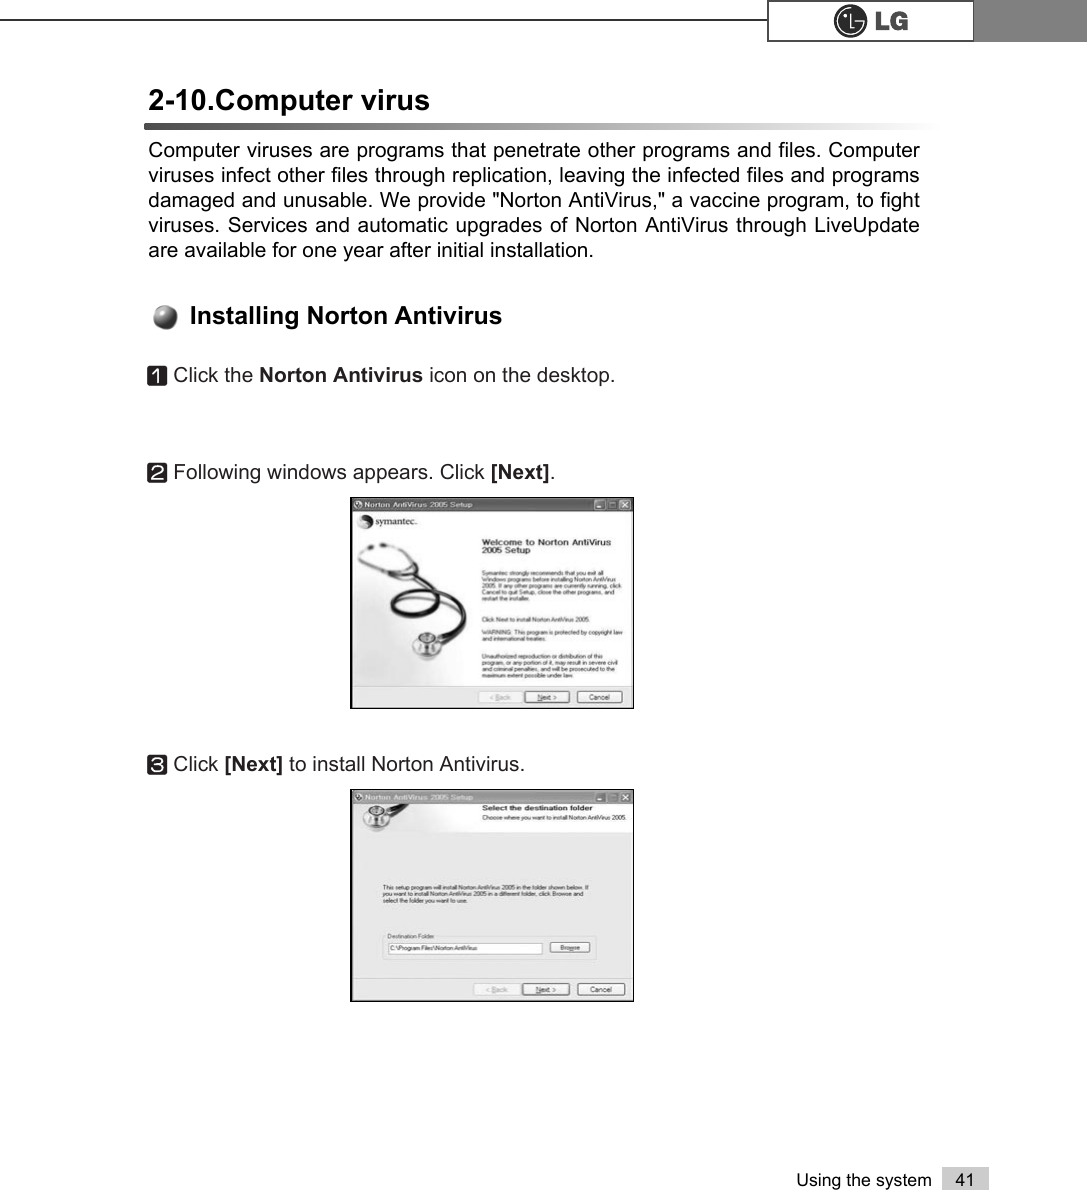 41Using the systemComputer viruses are programs that penetrate other programs and files. Computerviruses infect other files through replication, leaving the infected files and programsdamaged and unusable. We provide &quot;Norton AntiVirus,&quot; a vaccine program, to fightviruses. Services and automatic upgrades of Norton AntiVirus through LiveUpdateare available for one year after initial installation. 2-10.Computer virusⓞClick the Norton Antivirus icon on the desktop.ⓟFollowing windows appears. Click [Next]. ⓠClick [Next] to install Norton Antivirus.Installing Norton Antivirus